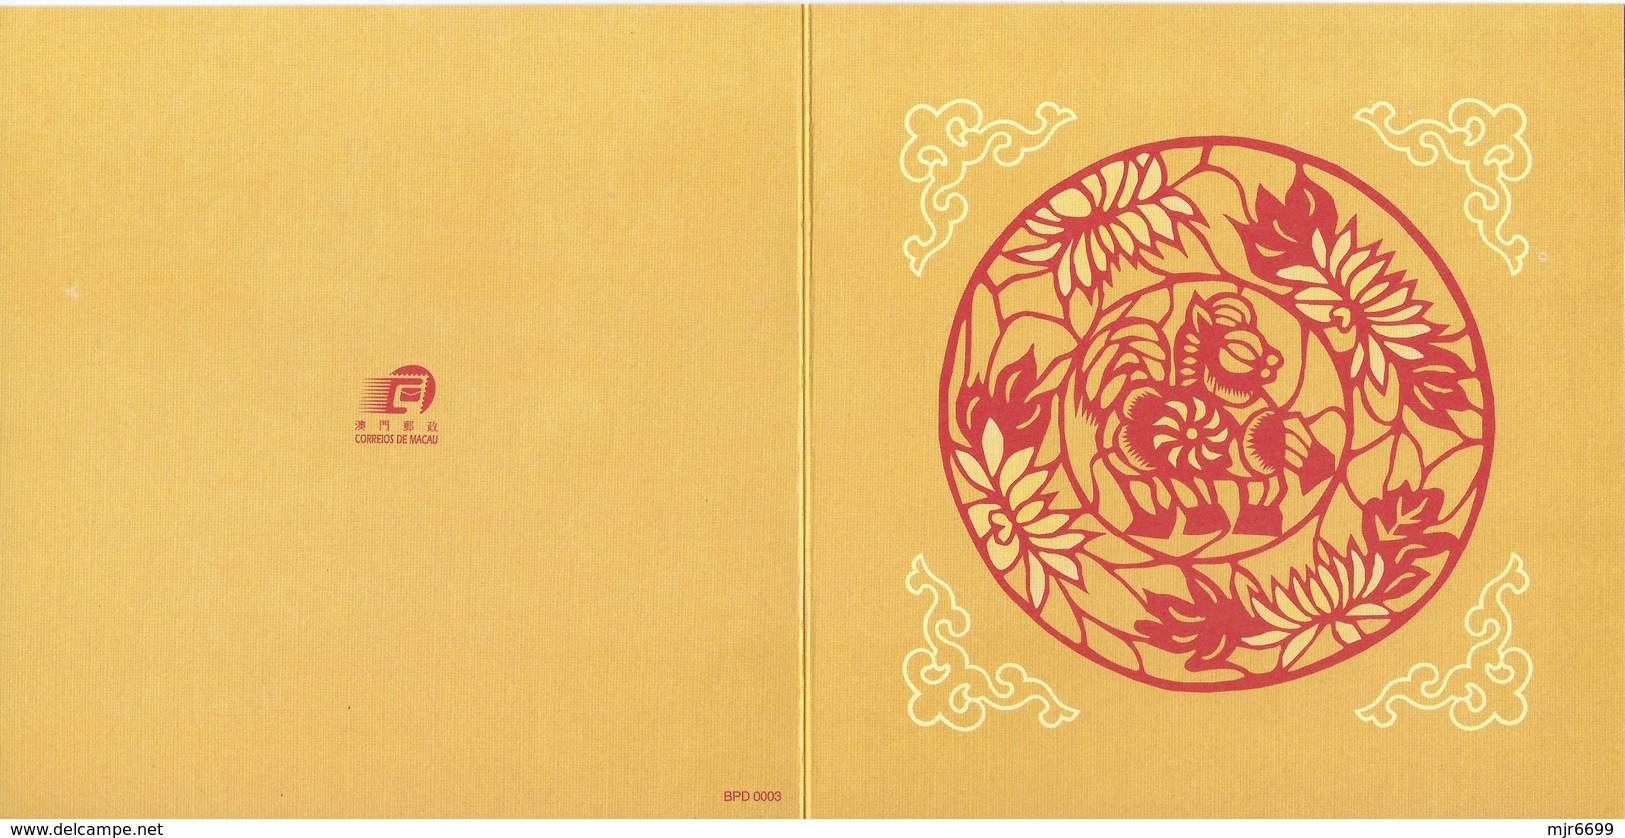 MACAU 2002 LUNAR NEW YEAR OF THE HORSE GREETING CARD & POSTAGE PAID COVER, LOCAL USAGE,  POST OFFICE CODE #BPD003 - Postal Stationery